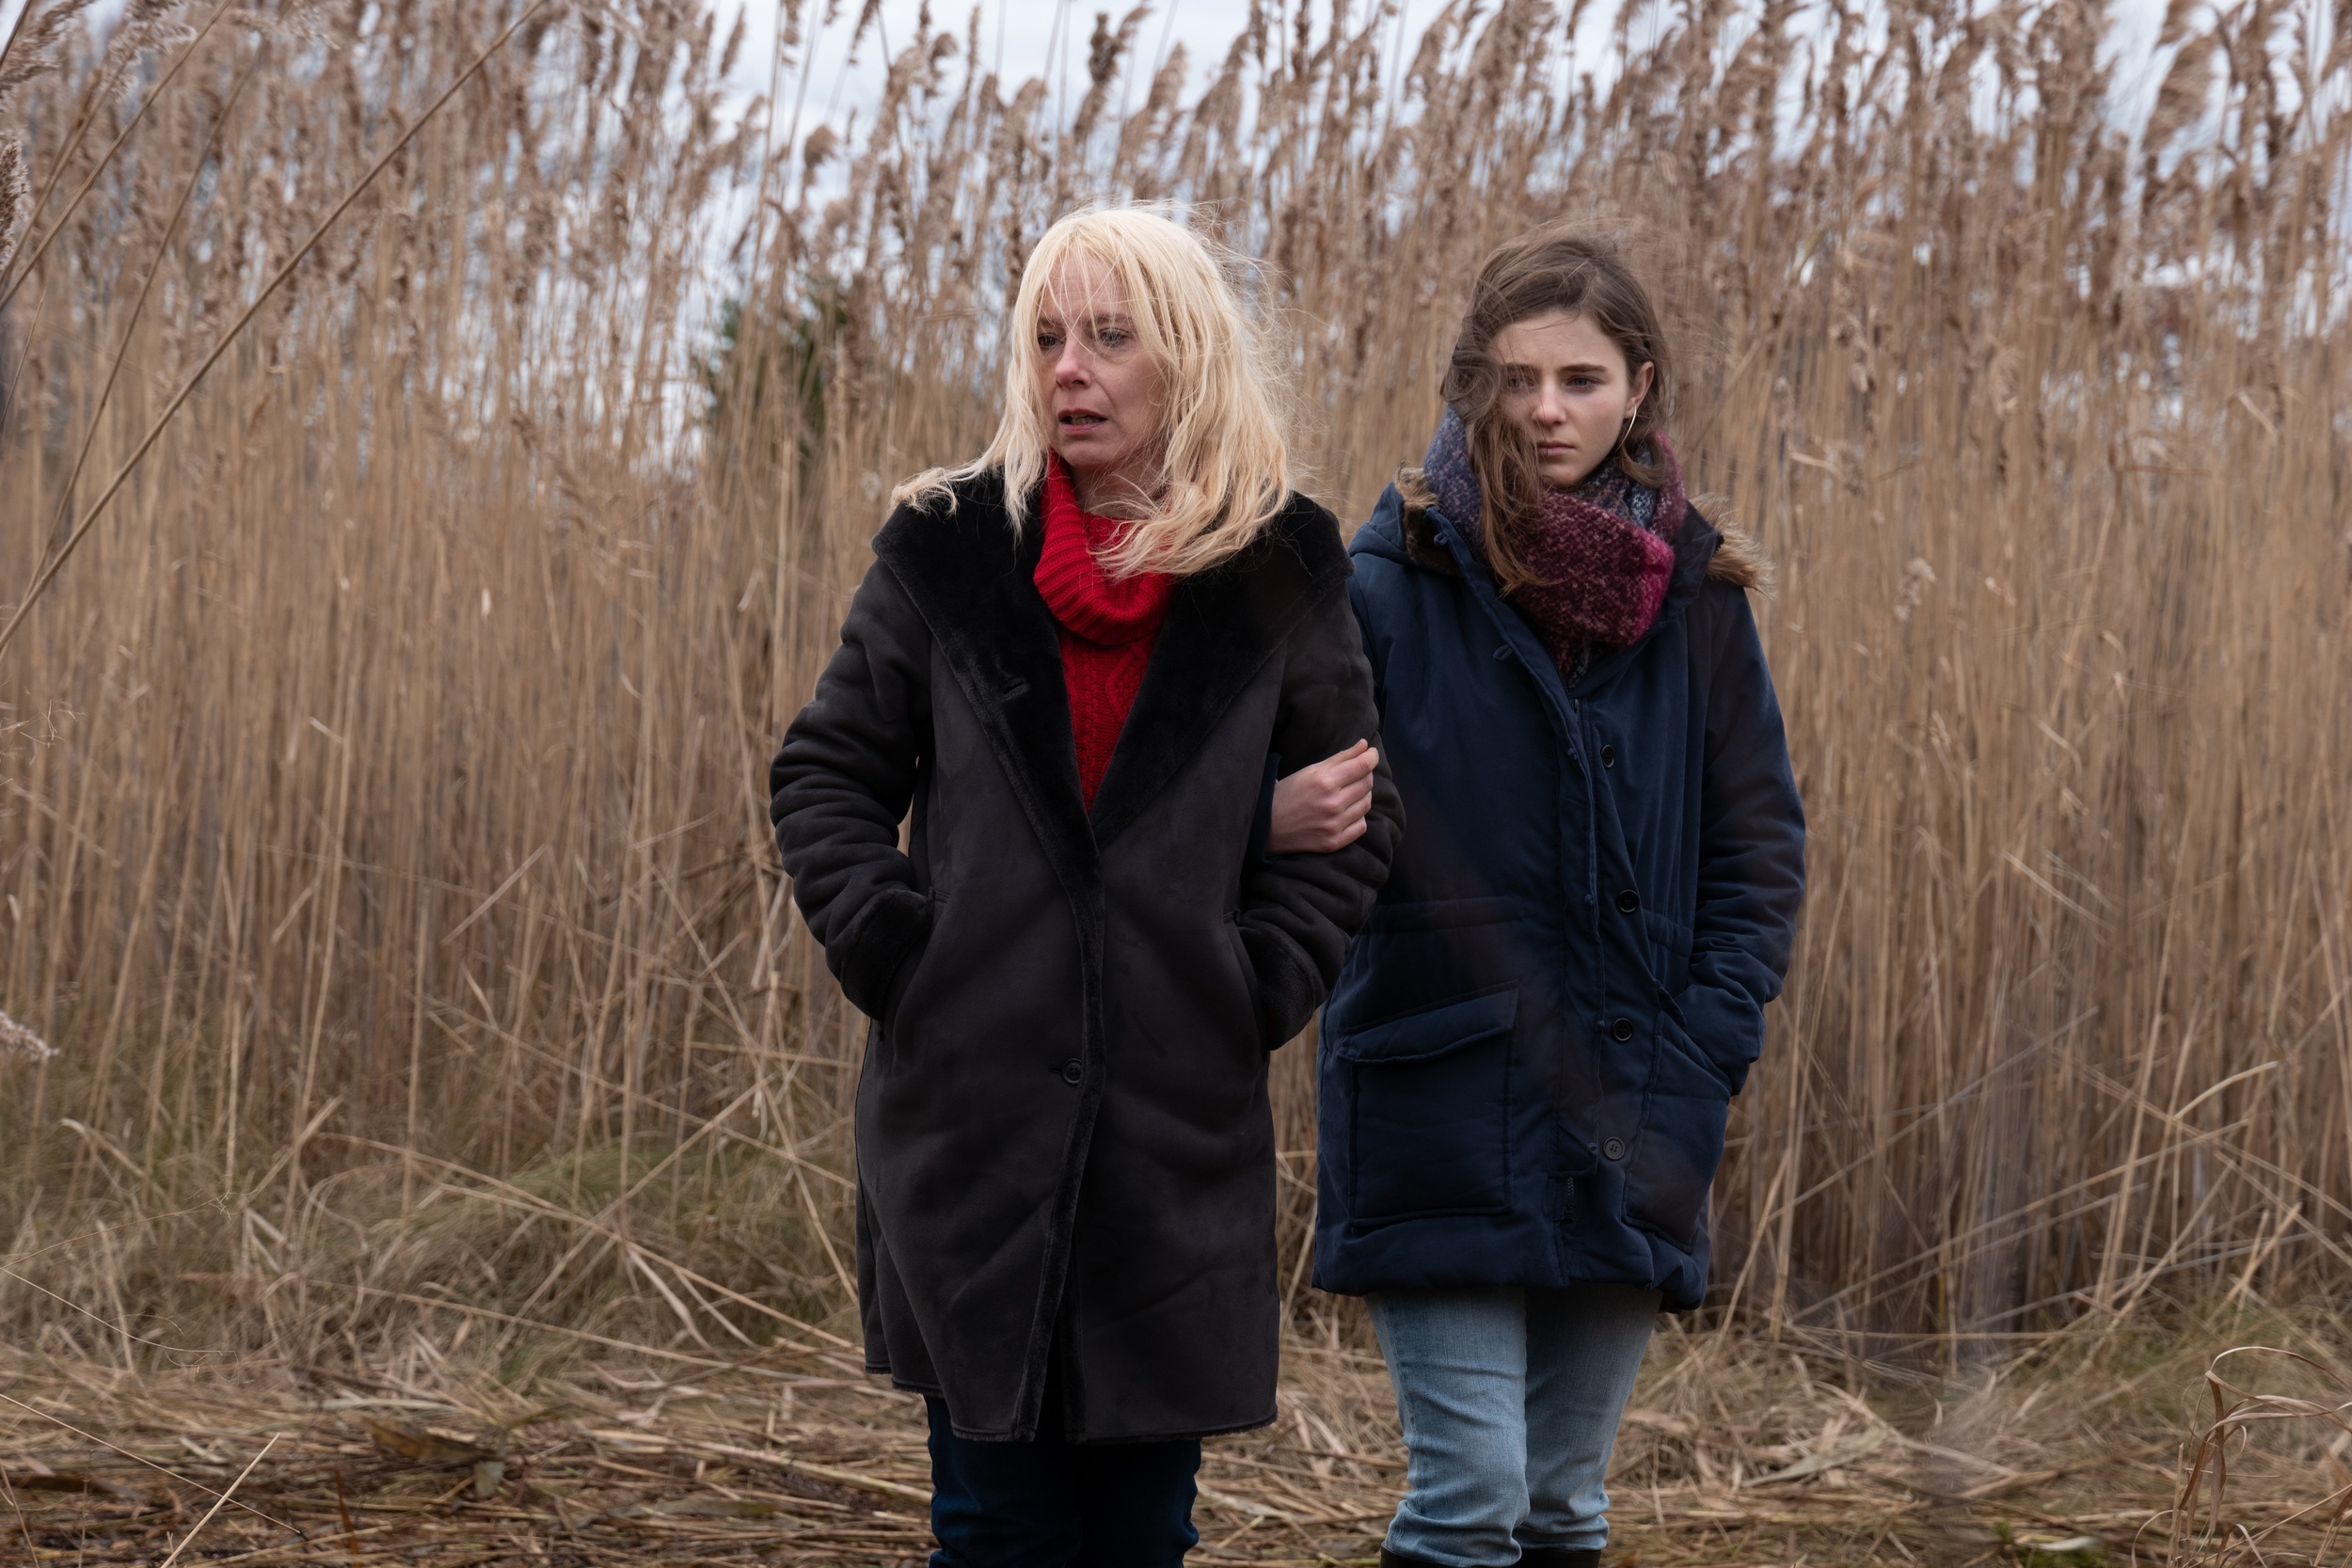 <p>Yes, unfortunately, <em>Lost Girls</em> is based on real events. The film tells the story of the Long Island serial killer, who, terrifyingly, has never been officially identified. The Netflix original is a startling reminder that sometimes real life is scarier than stories. </p><p><a href='https://www.msn.com/en-us/community/channel/vid-cj9pqbr0vn9in2b6ddcd8sfgpfq6x6utp44fssrv6mc2gtybw0us'>Follow us on MSN to see more of our exclusive entertainment content.</a></p>